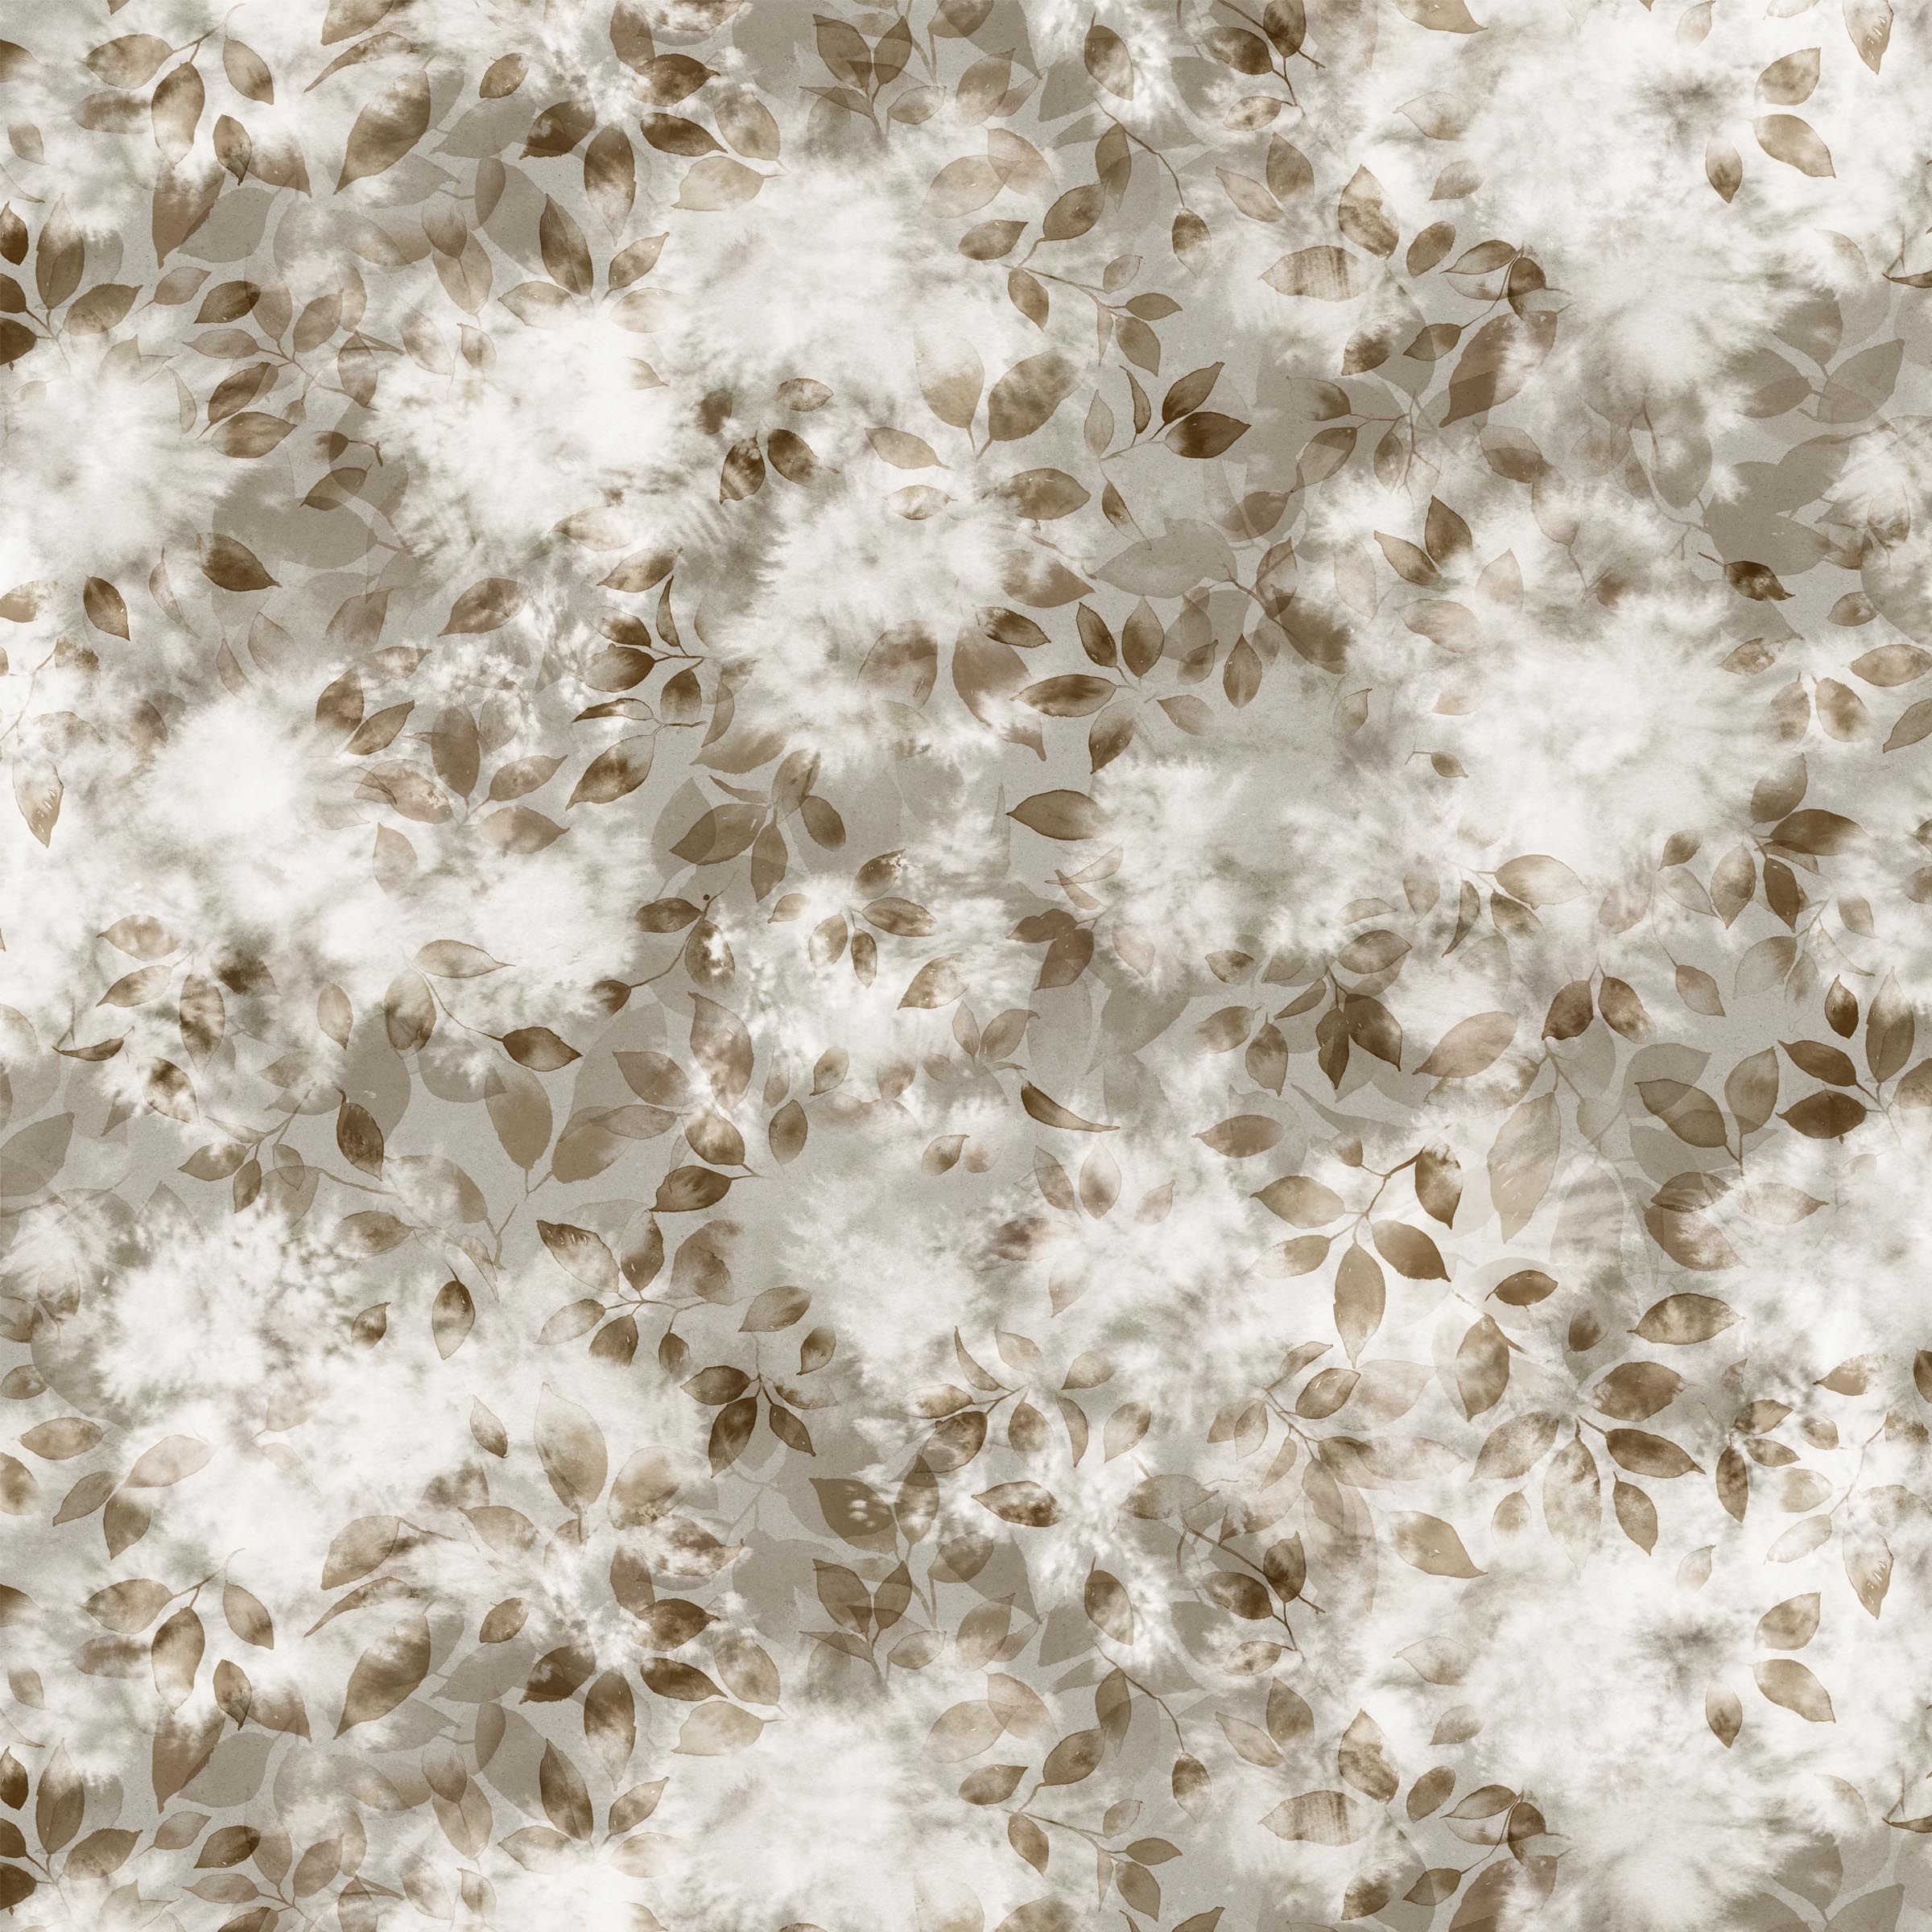 Detail of wallpaper in a painterly leaf print in shades of brown and tan with a mottled white overlay.